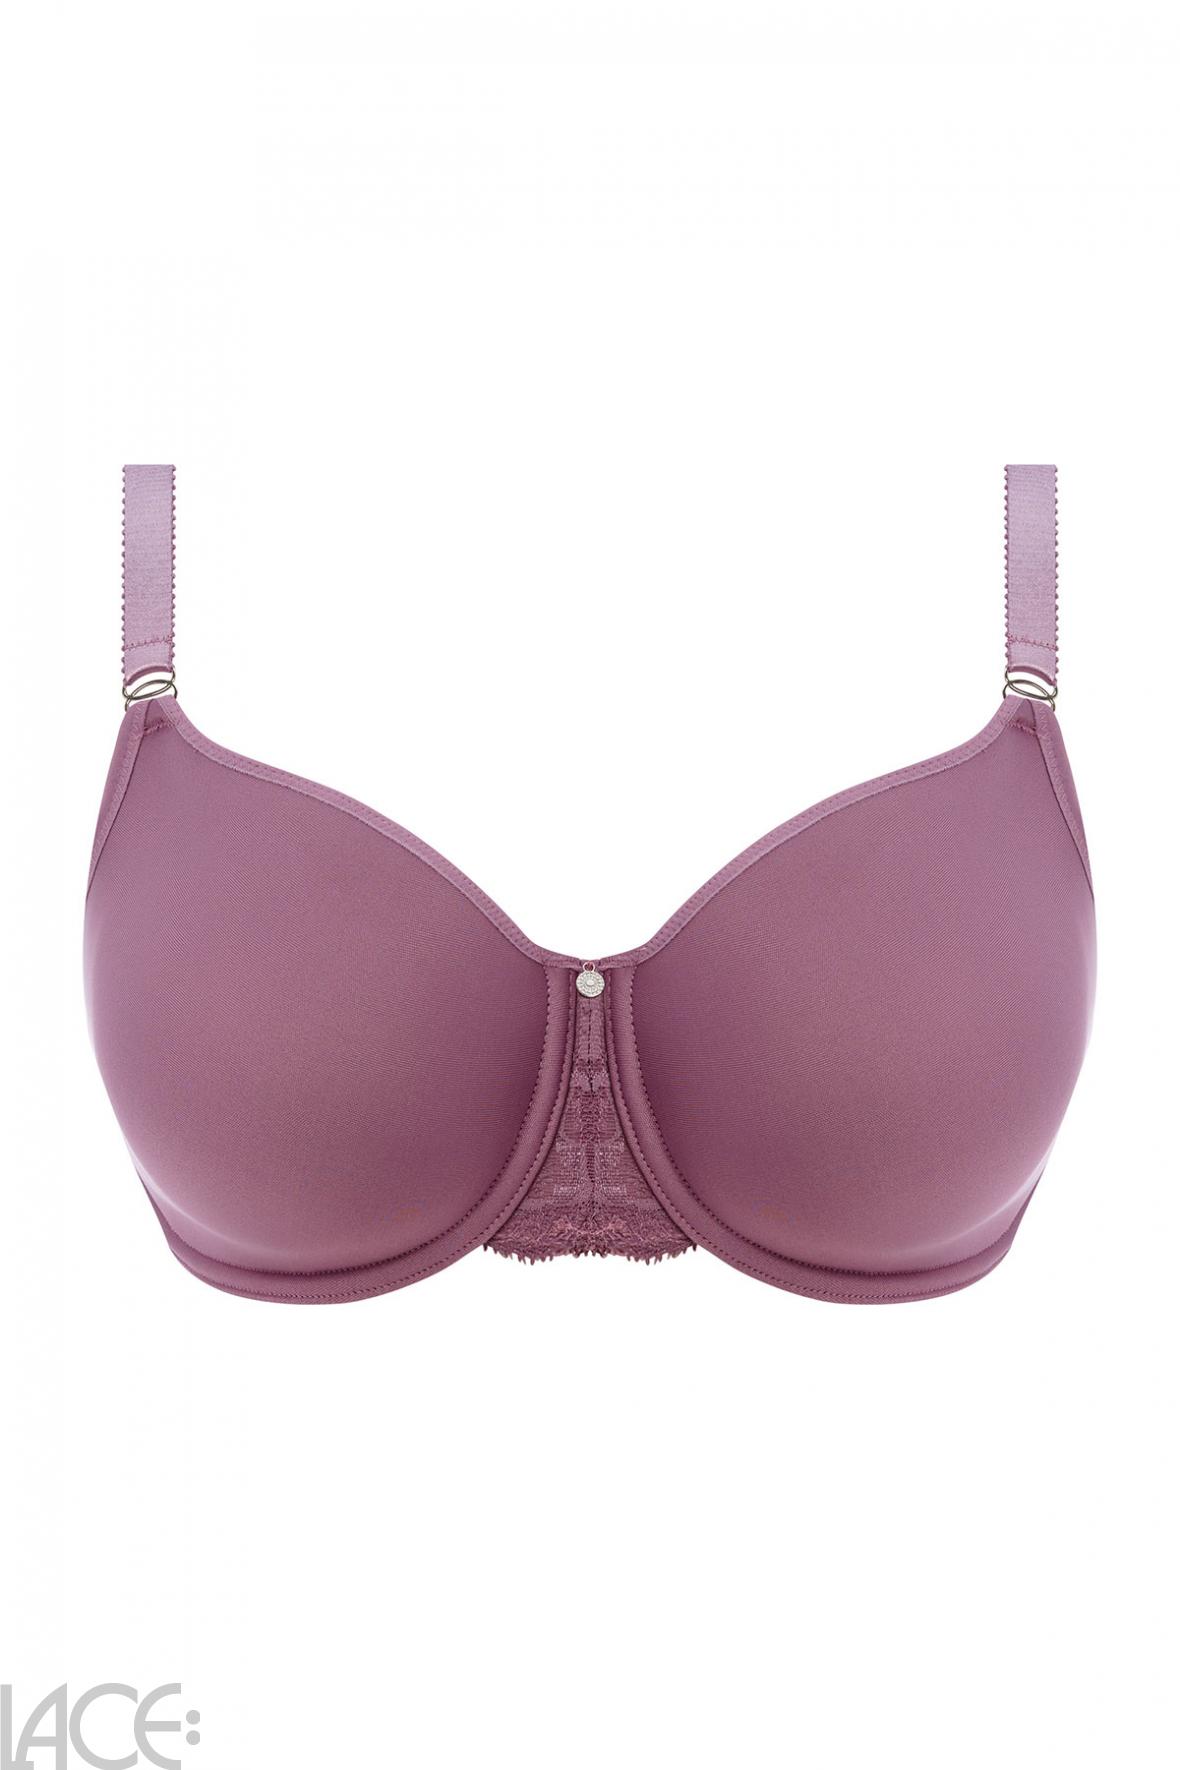 Fantasie Lingerie Reflect T-shirt Spacer bra F-J cup HEATHER